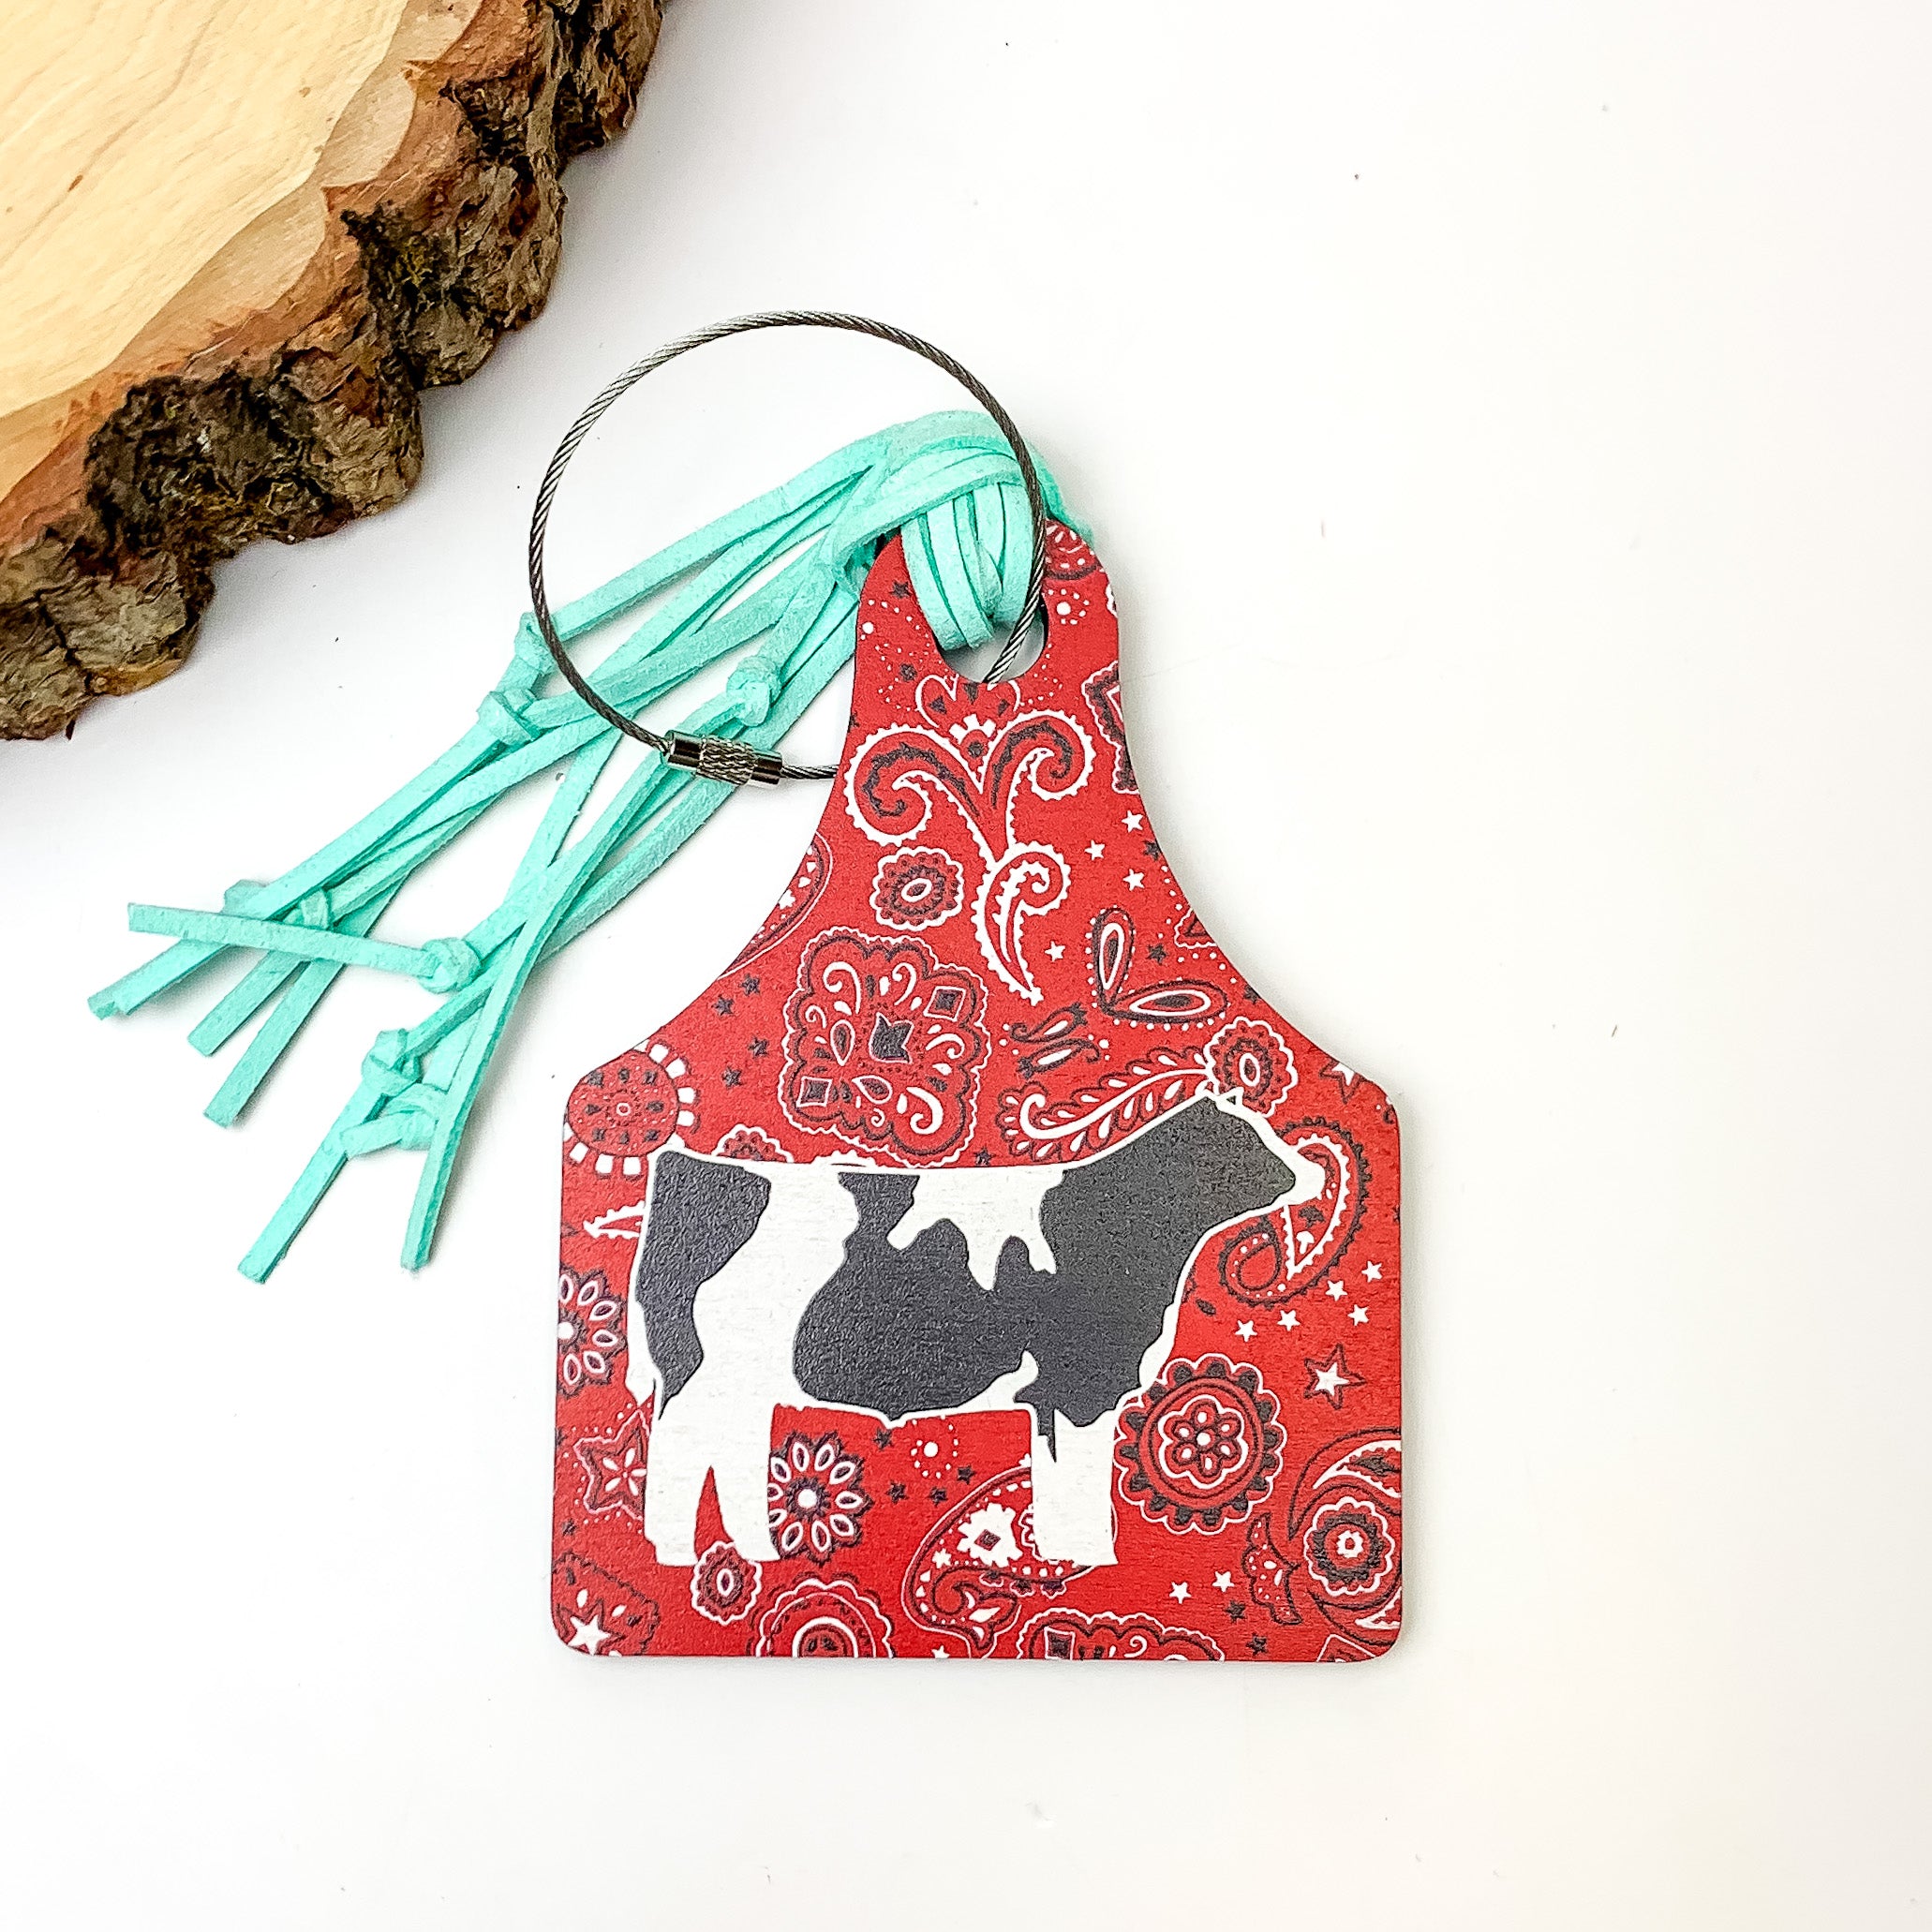 Red and Turquoise Luggage Tag With Cow. Pictured on a white background with a wood piece in the top left corner.